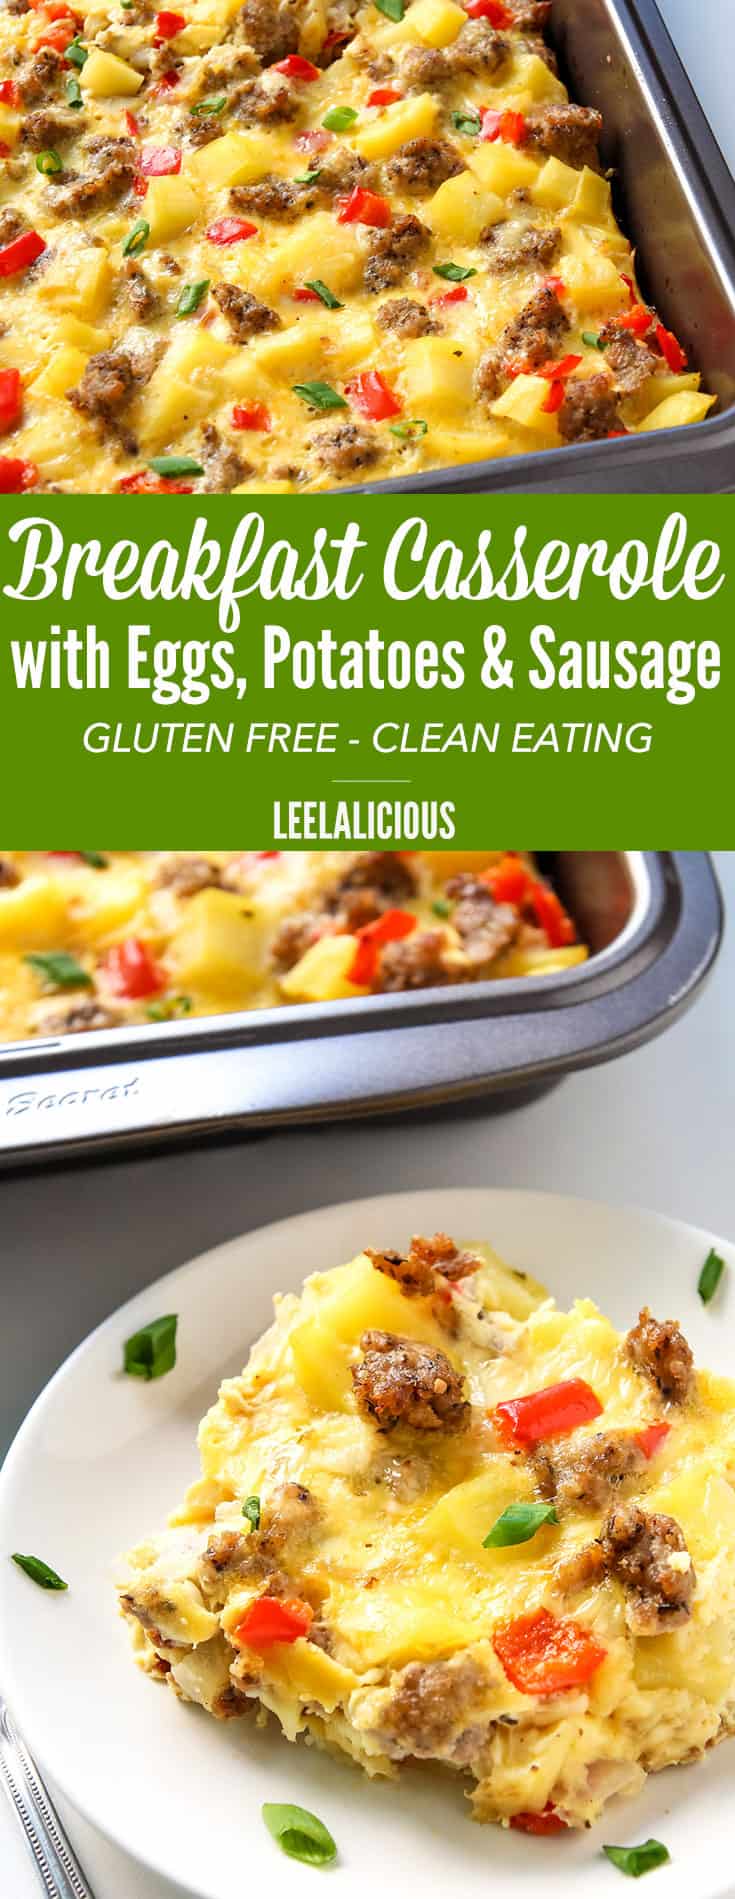 Breakfast Casserole with Eggs, Potatoes and Sausage - VIDEO » LeelaLicious